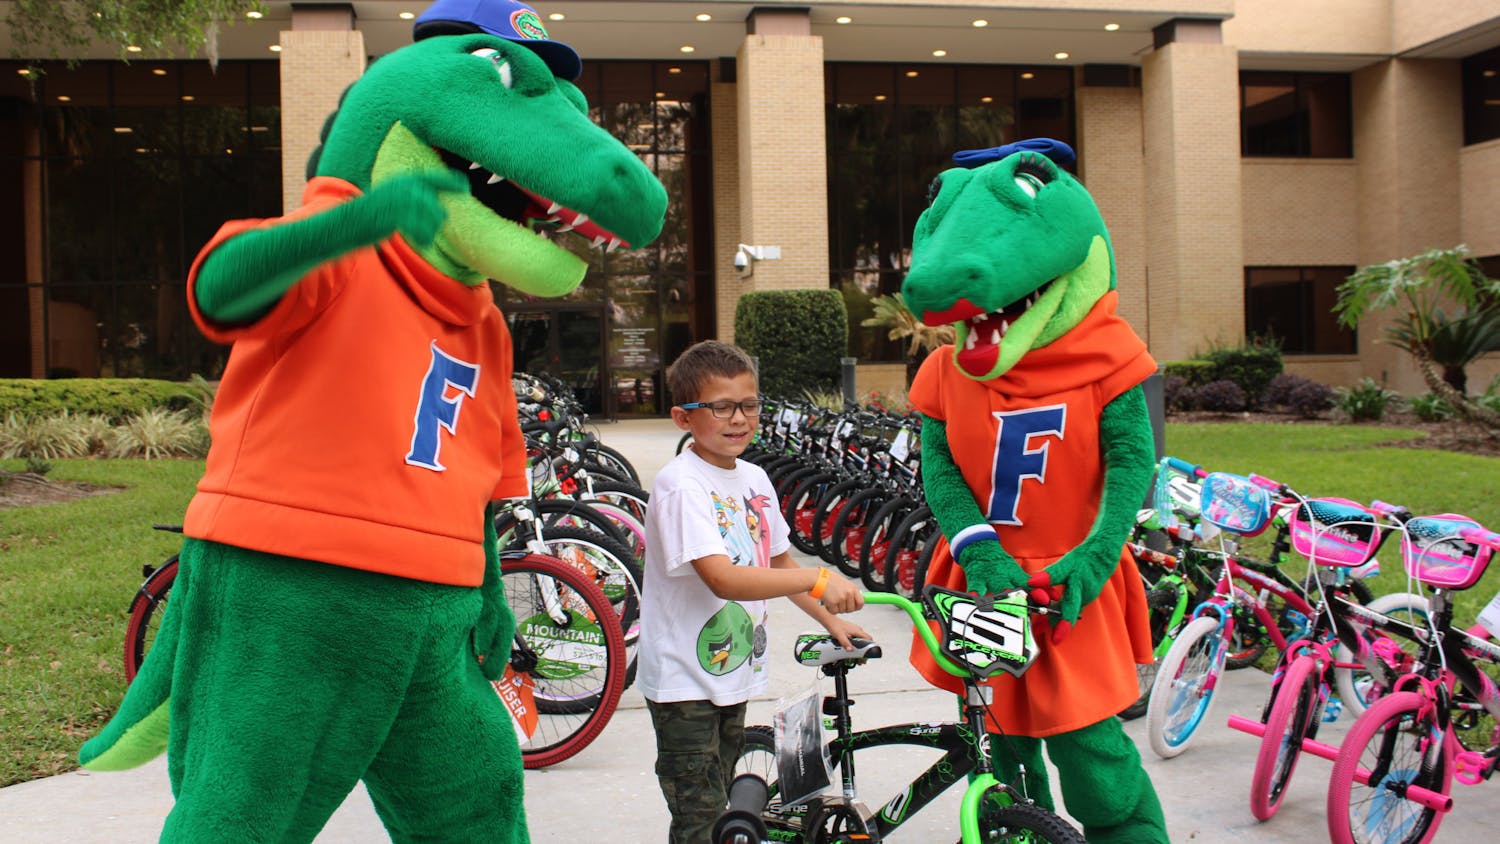 UF Health Shands Hospital gave away 86 bikes and 13 children's cars at the Bike Rodeo, Safety and Health Fair on Saturday, March 25, 2023.